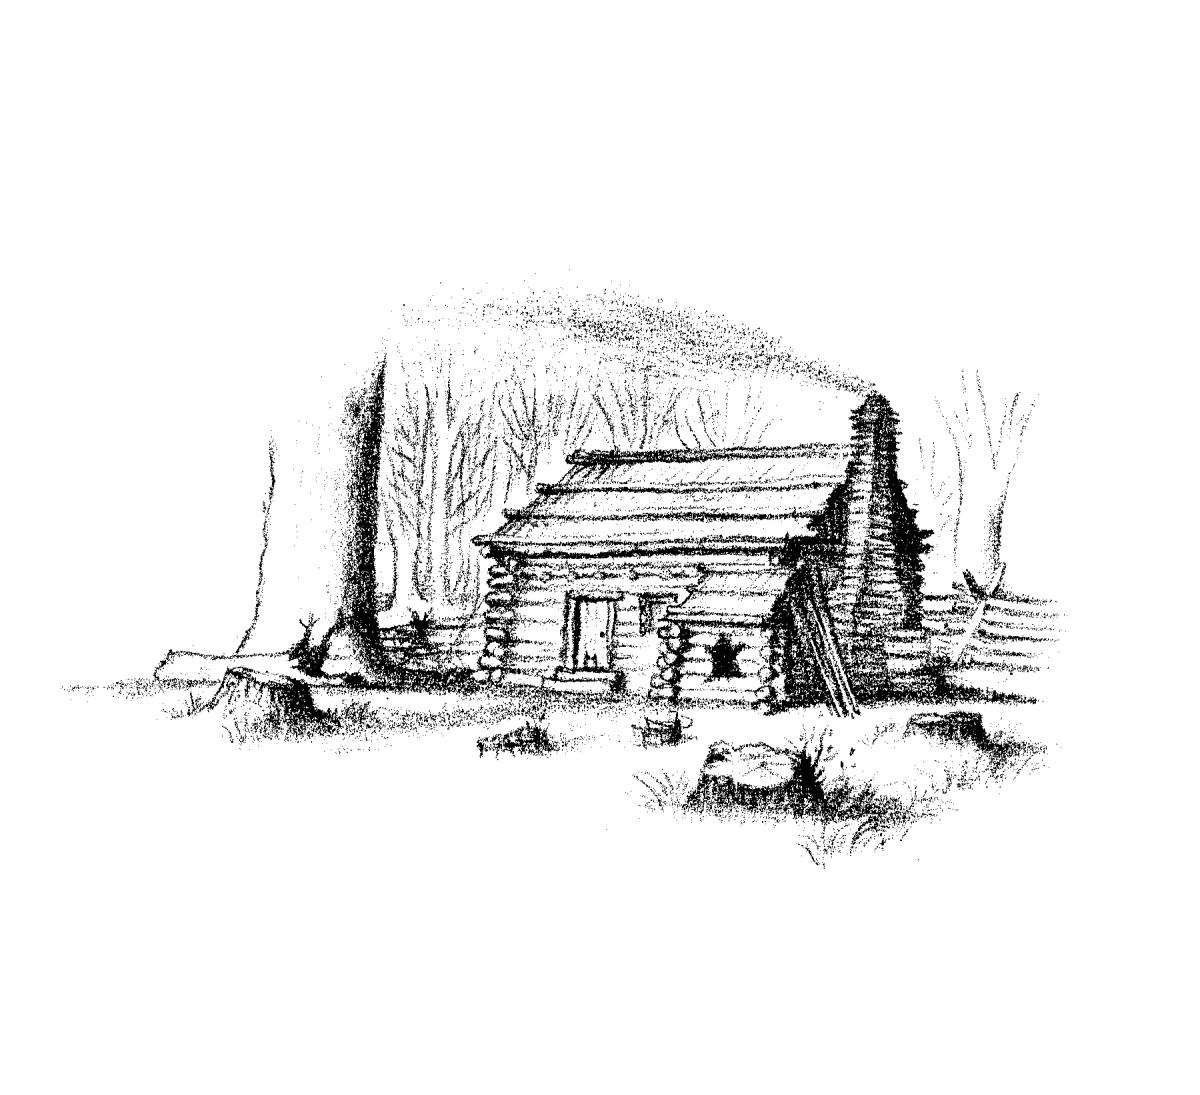 The Ingalls's wood cabin, with smoke coming out of the chimney